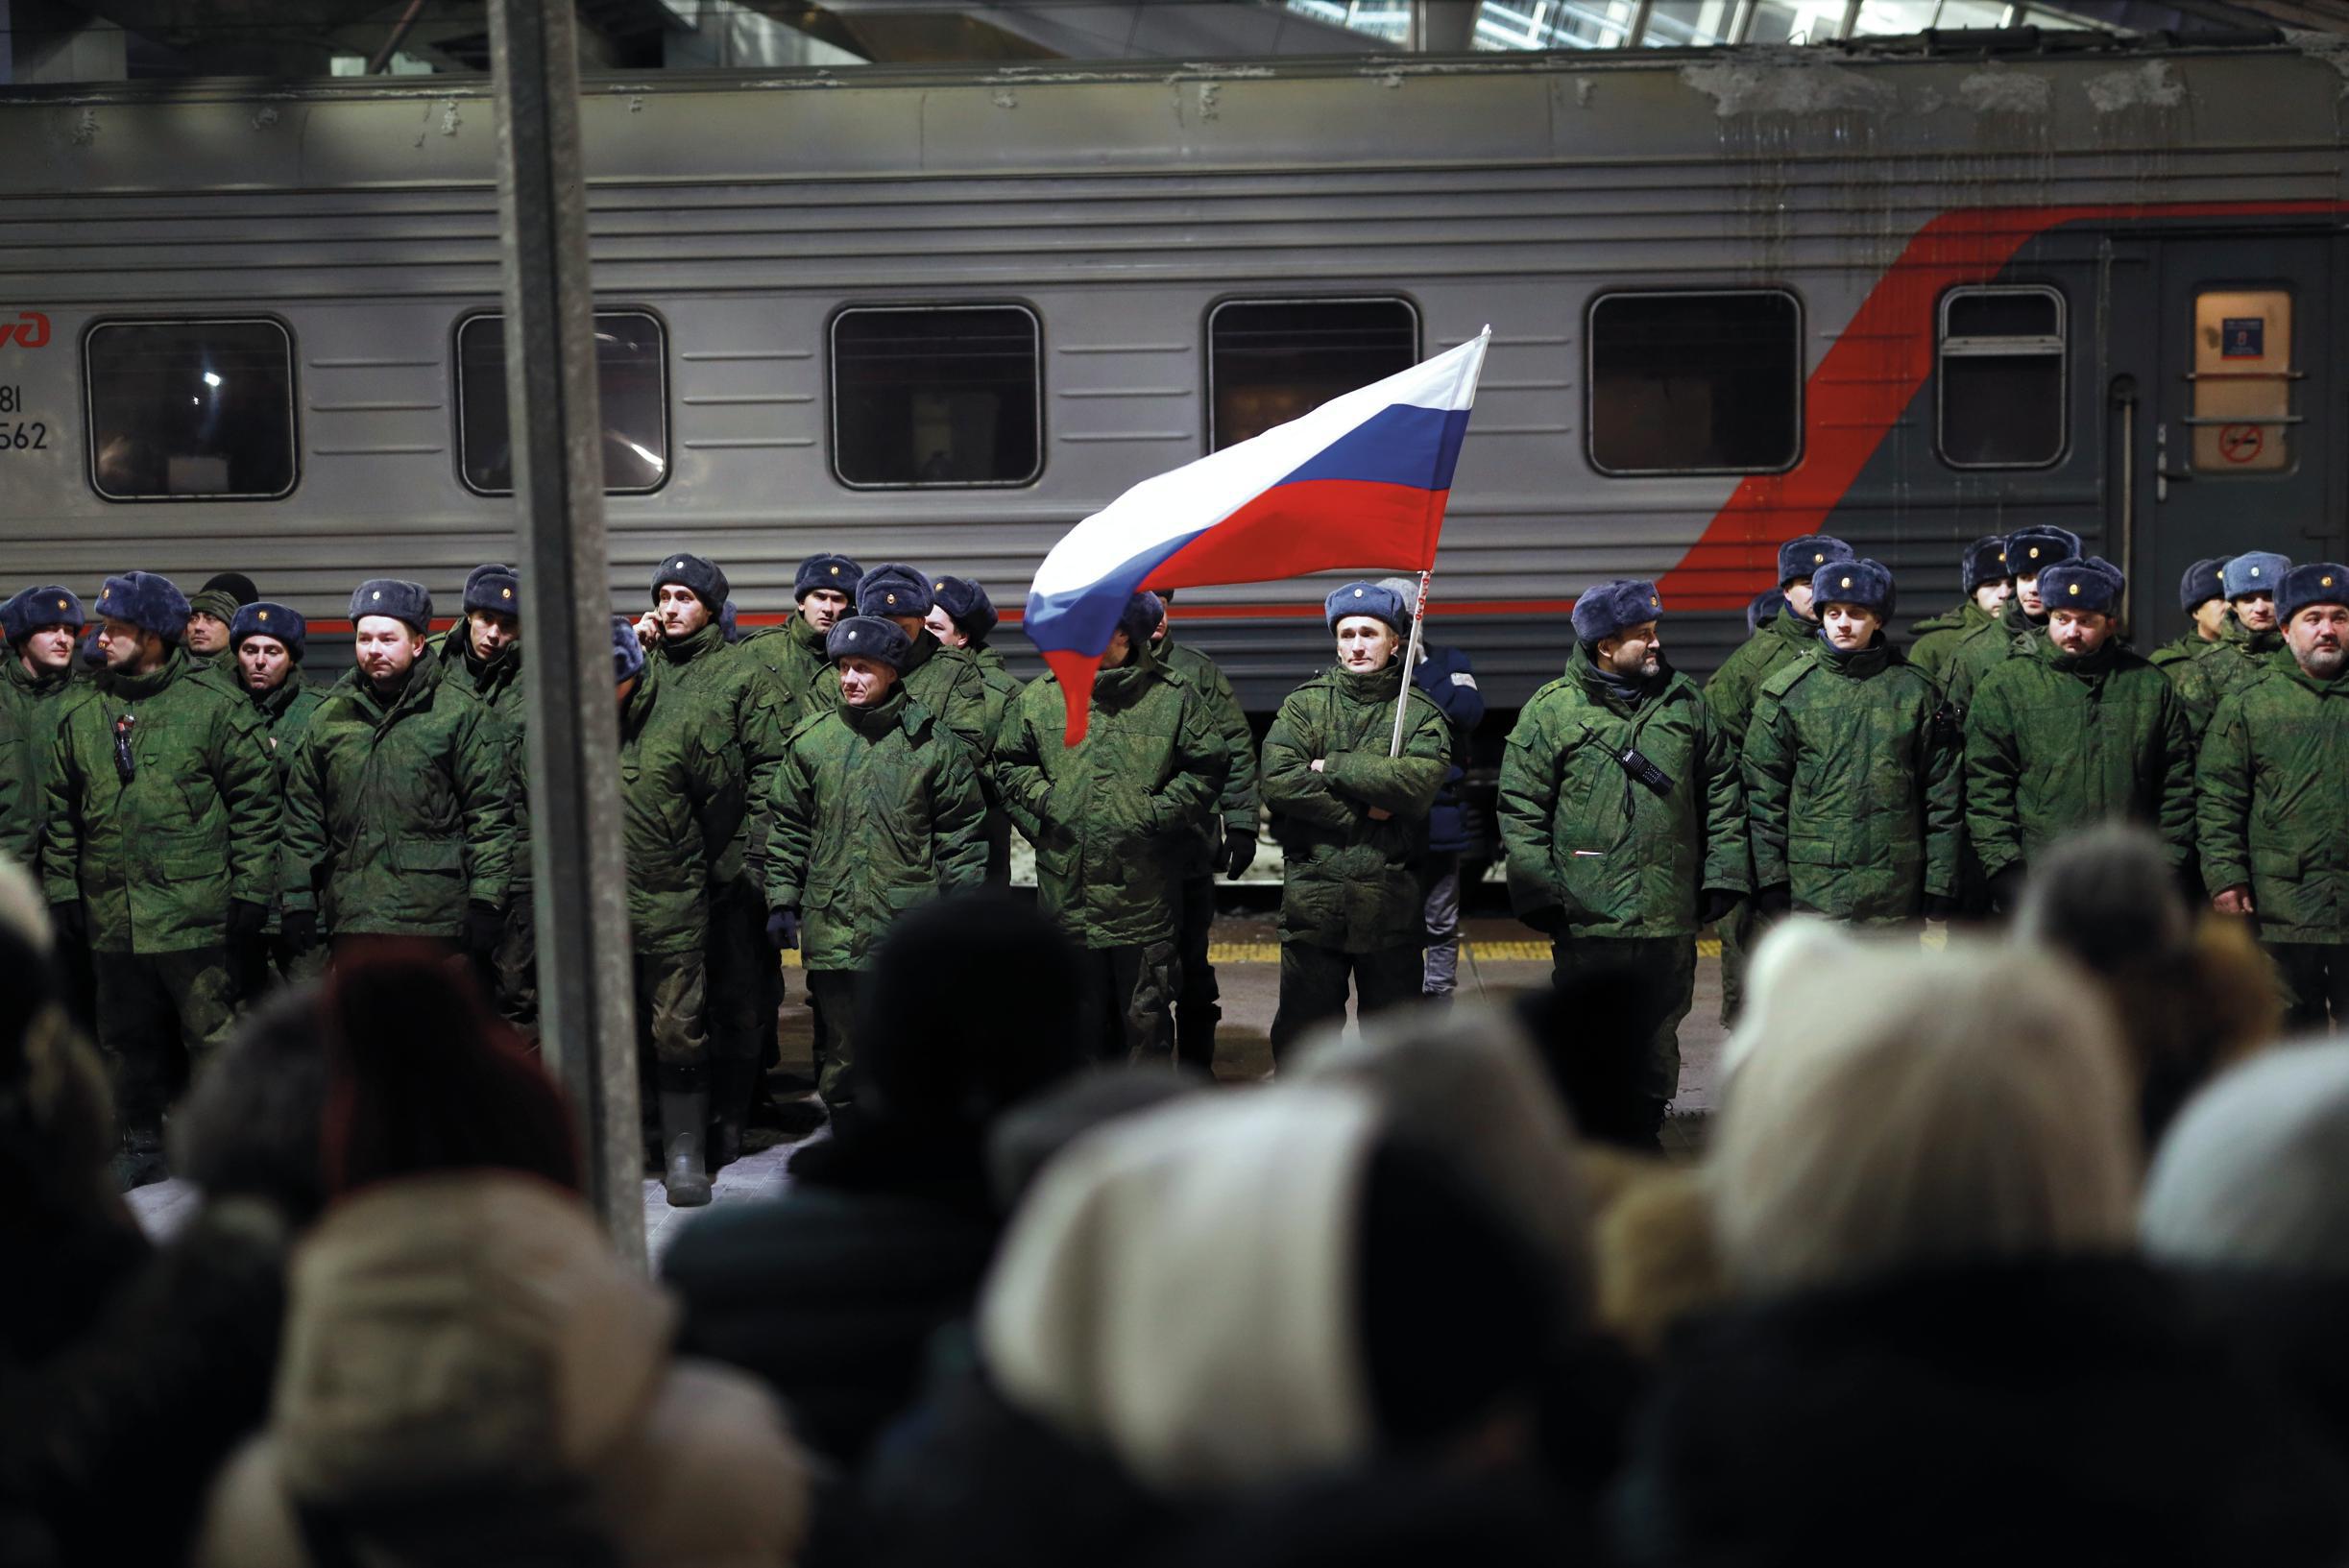 A drunken Russian soldier beats his captain to death on a train